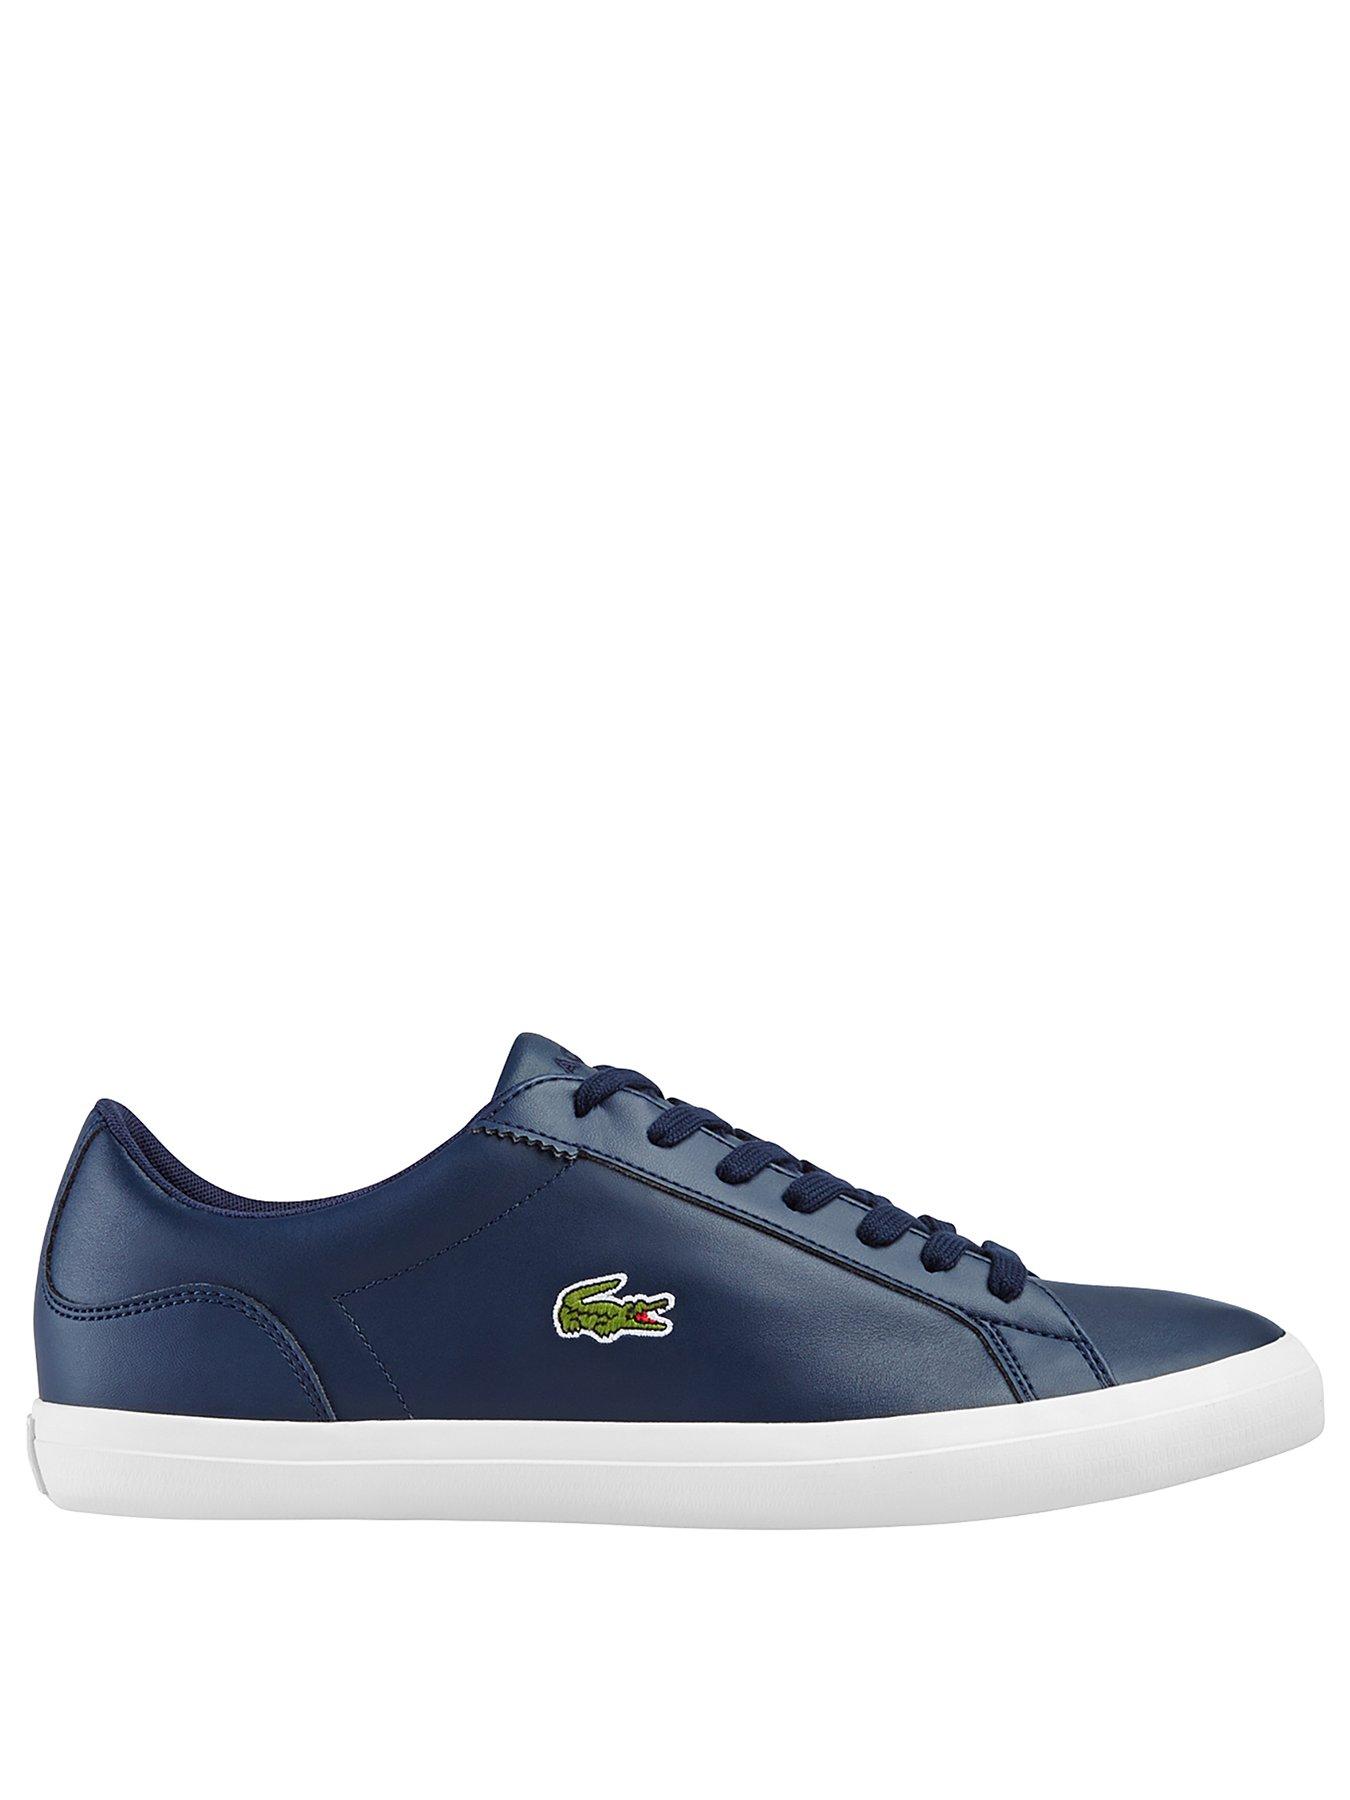 Lacoste Lerond Trainers - Navy | very.co.uk